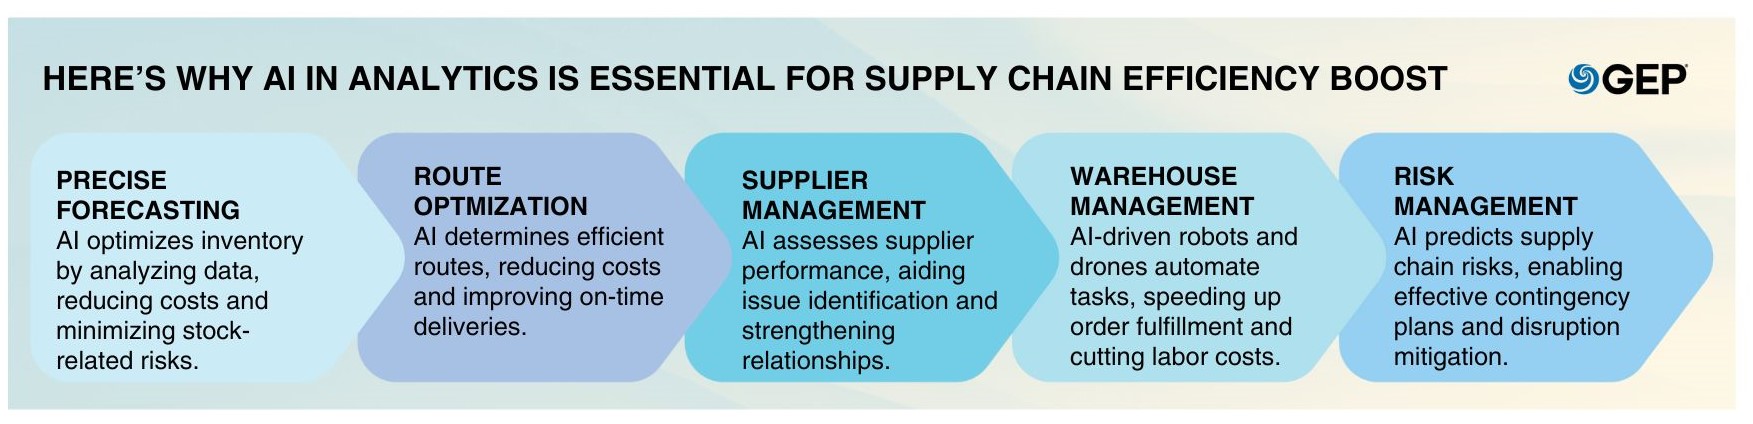 ai-in-analytics-a-data-driven-approach-to-supply-chain-efficiency